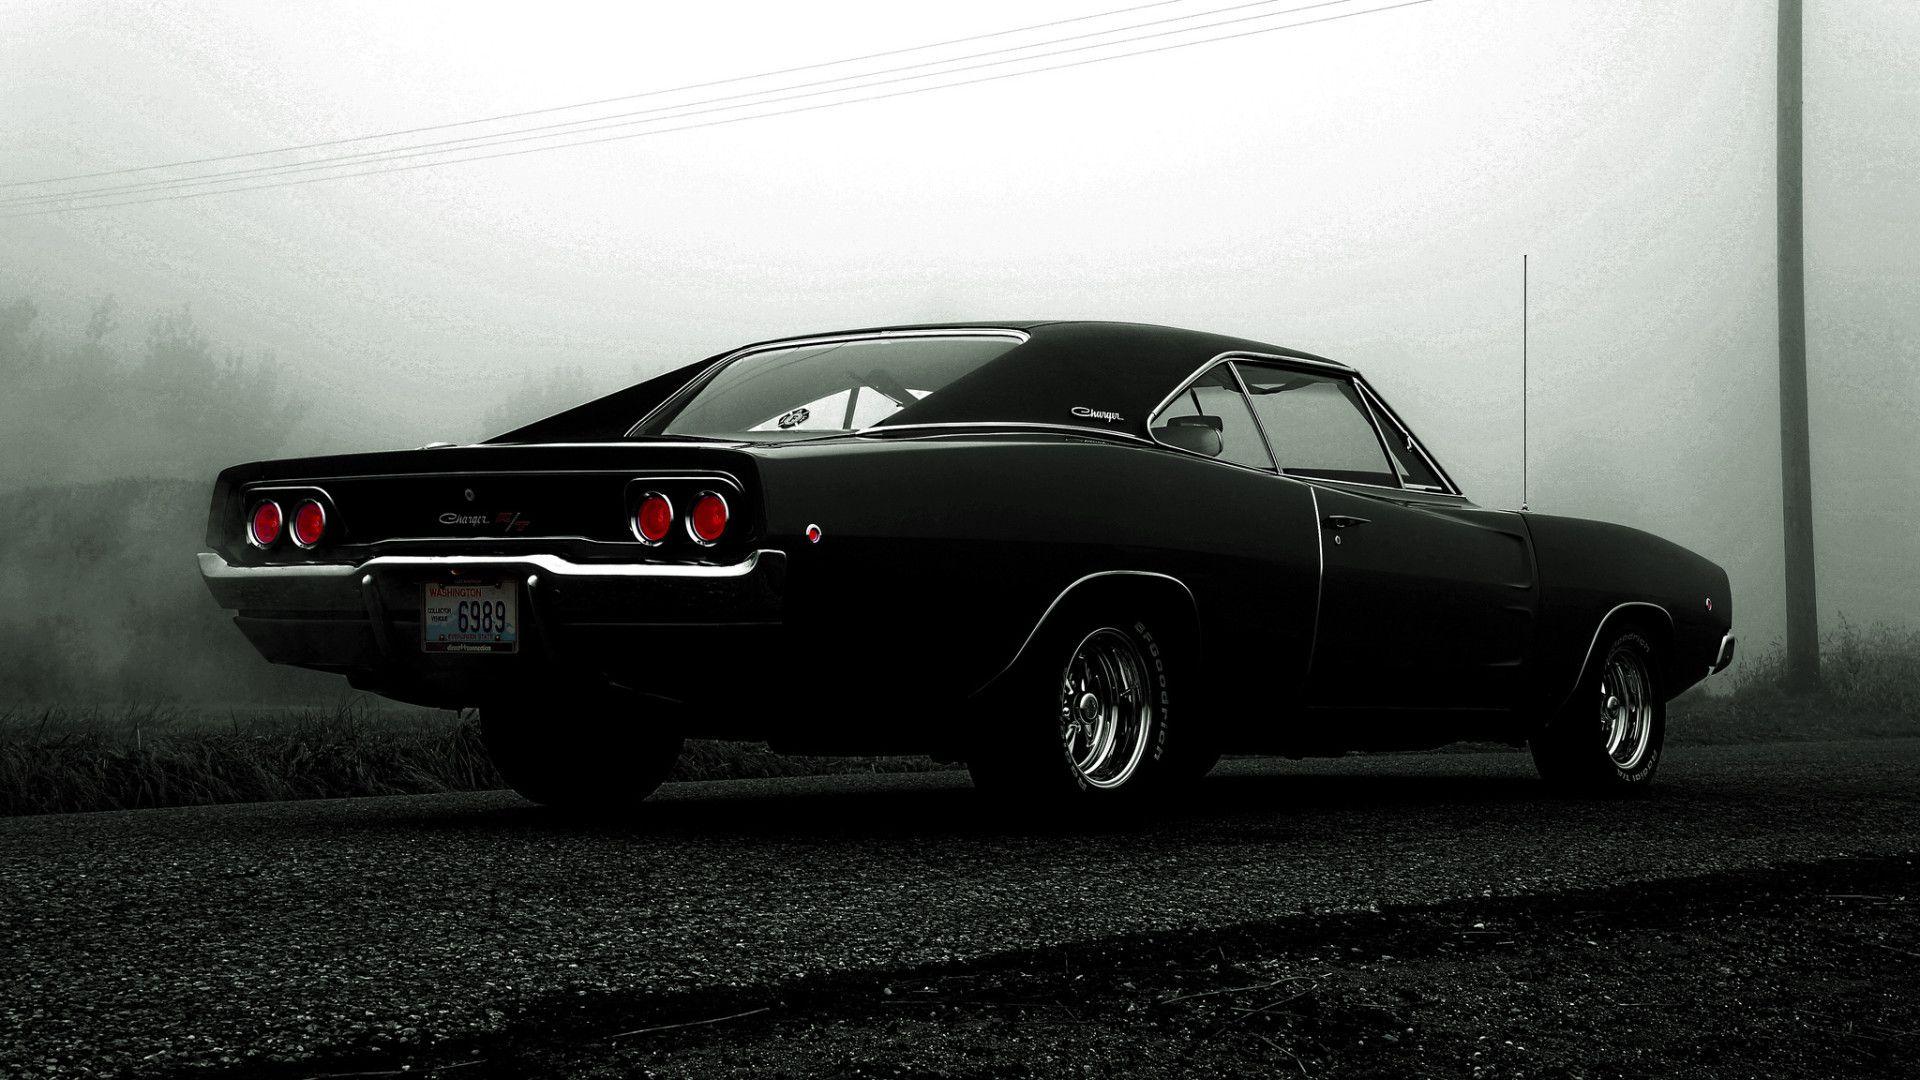 Dodge Charger Wallpaper HD Photo, Wallpaper and other Image